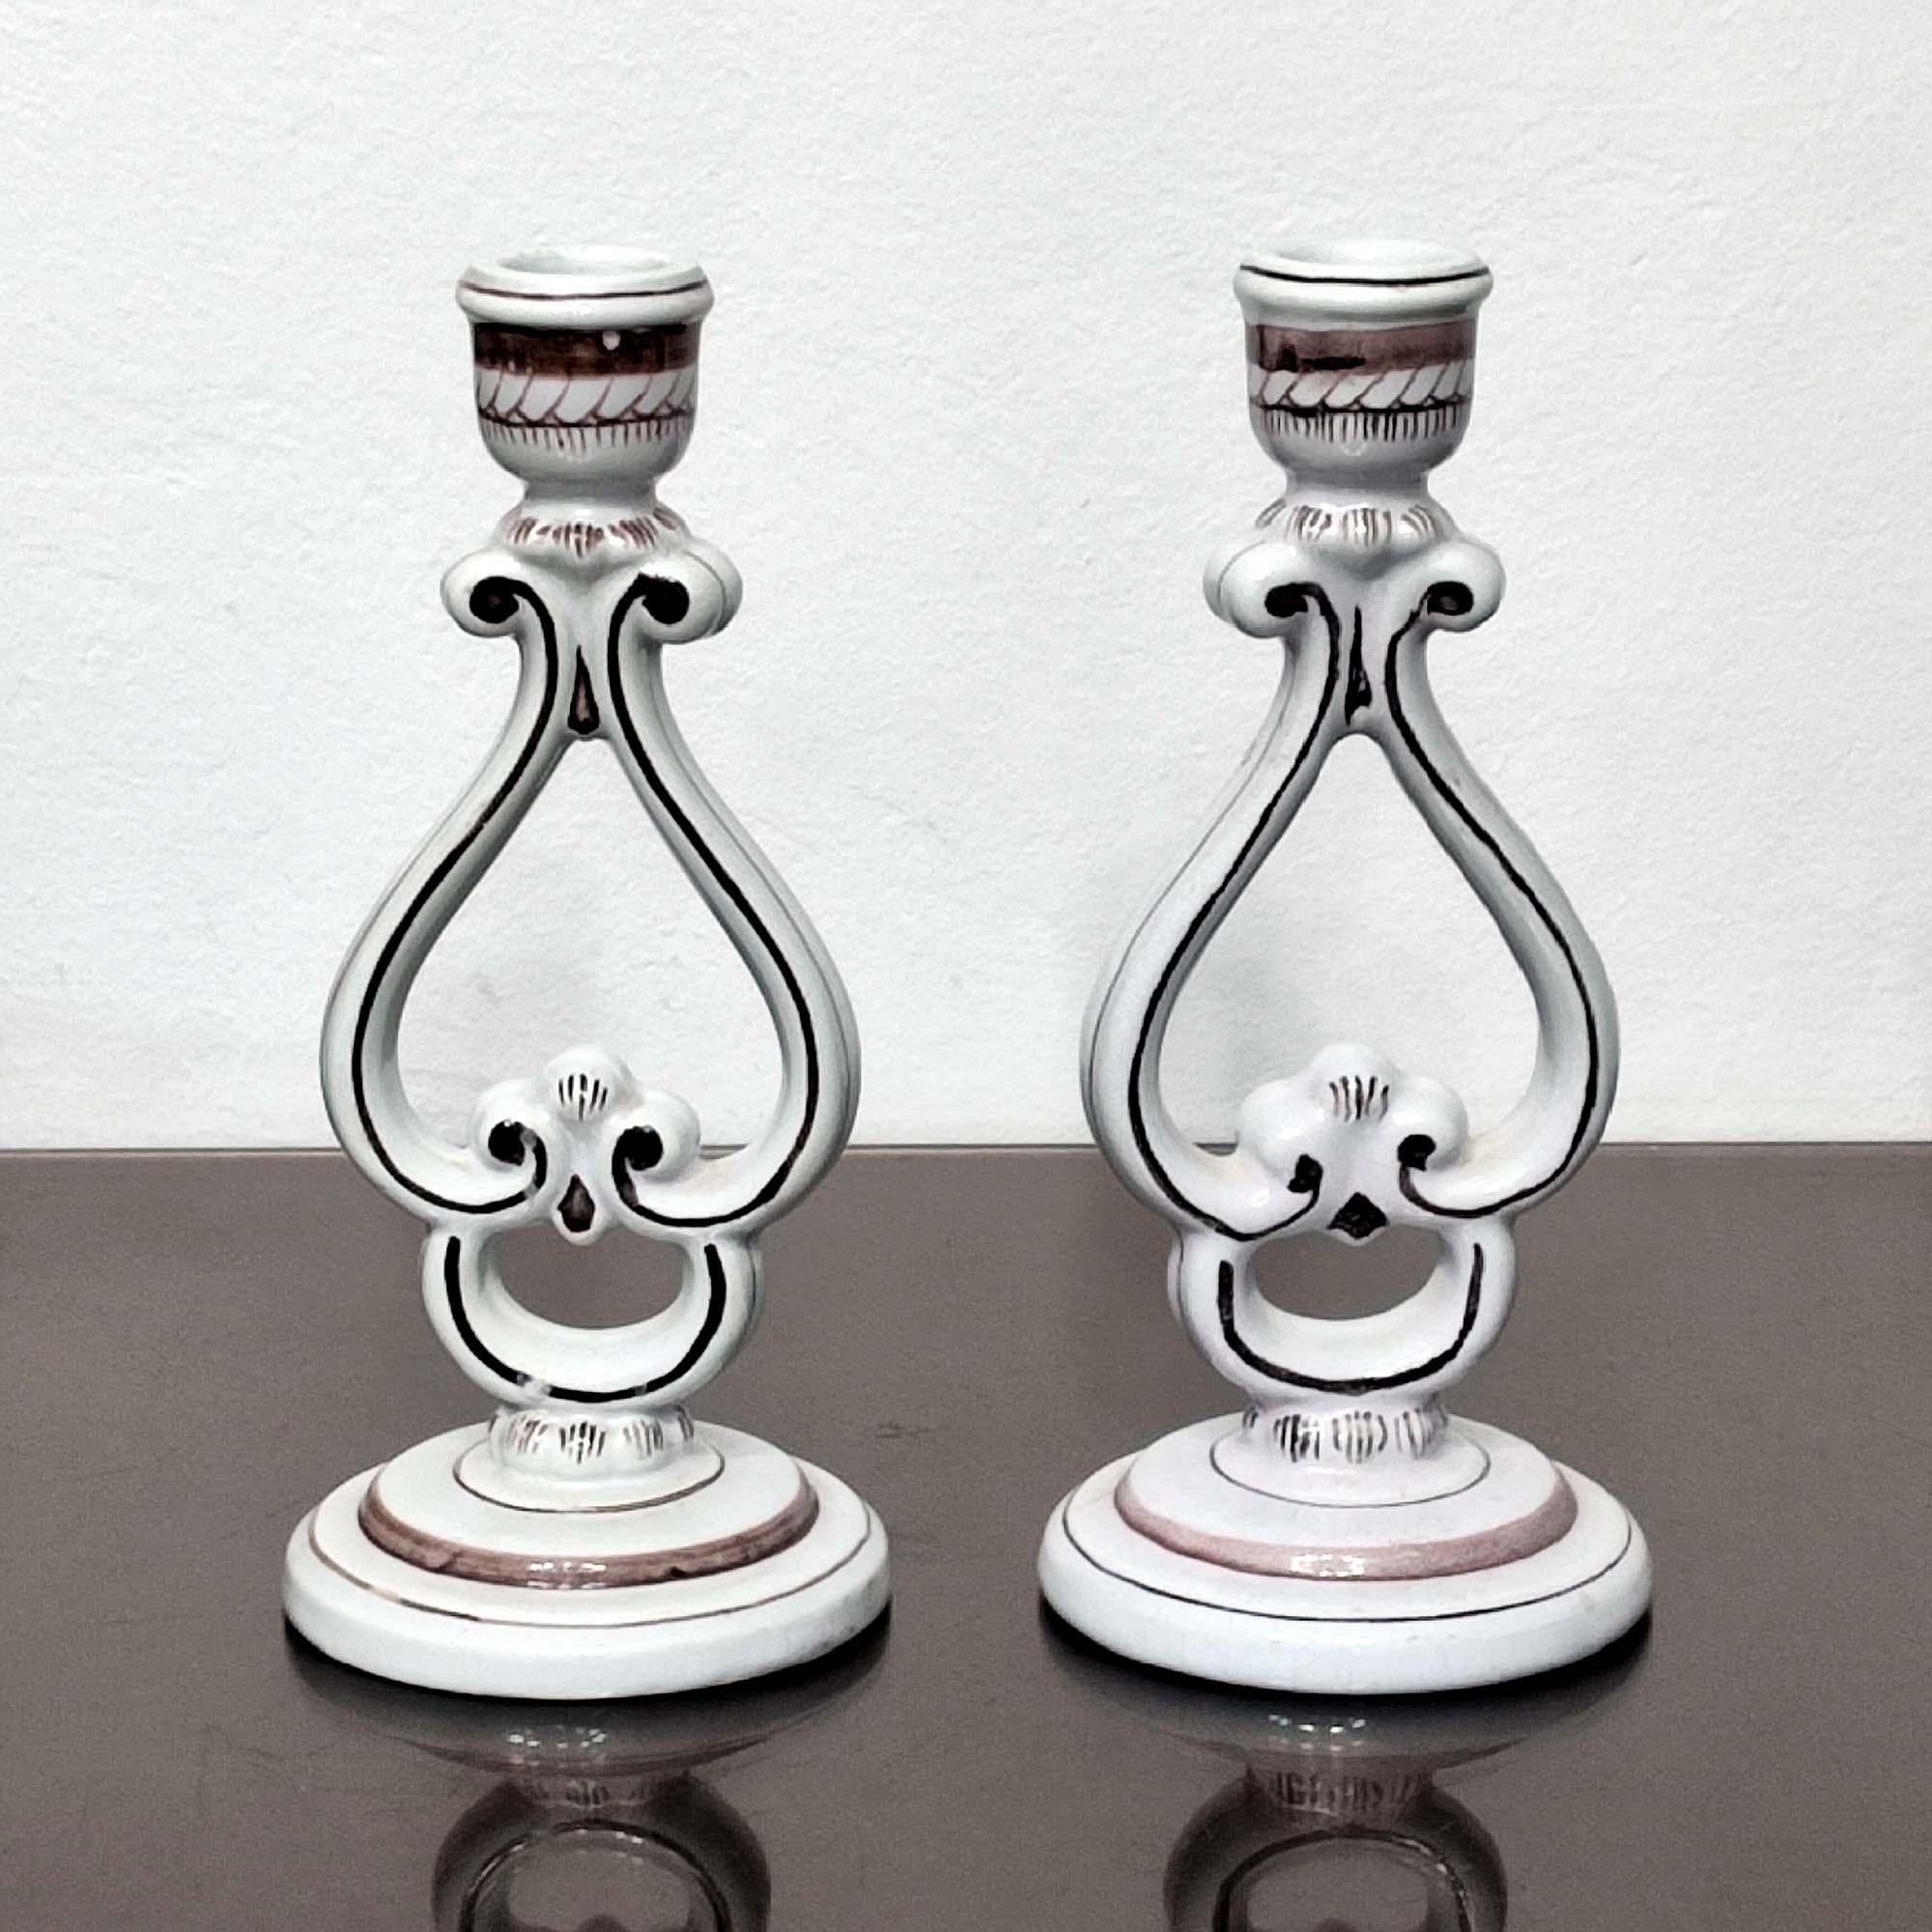 Art Deco Ceramic Candleholders Designed by Arthur Percy for Gefle, Sweden, 1920s For Sale 1